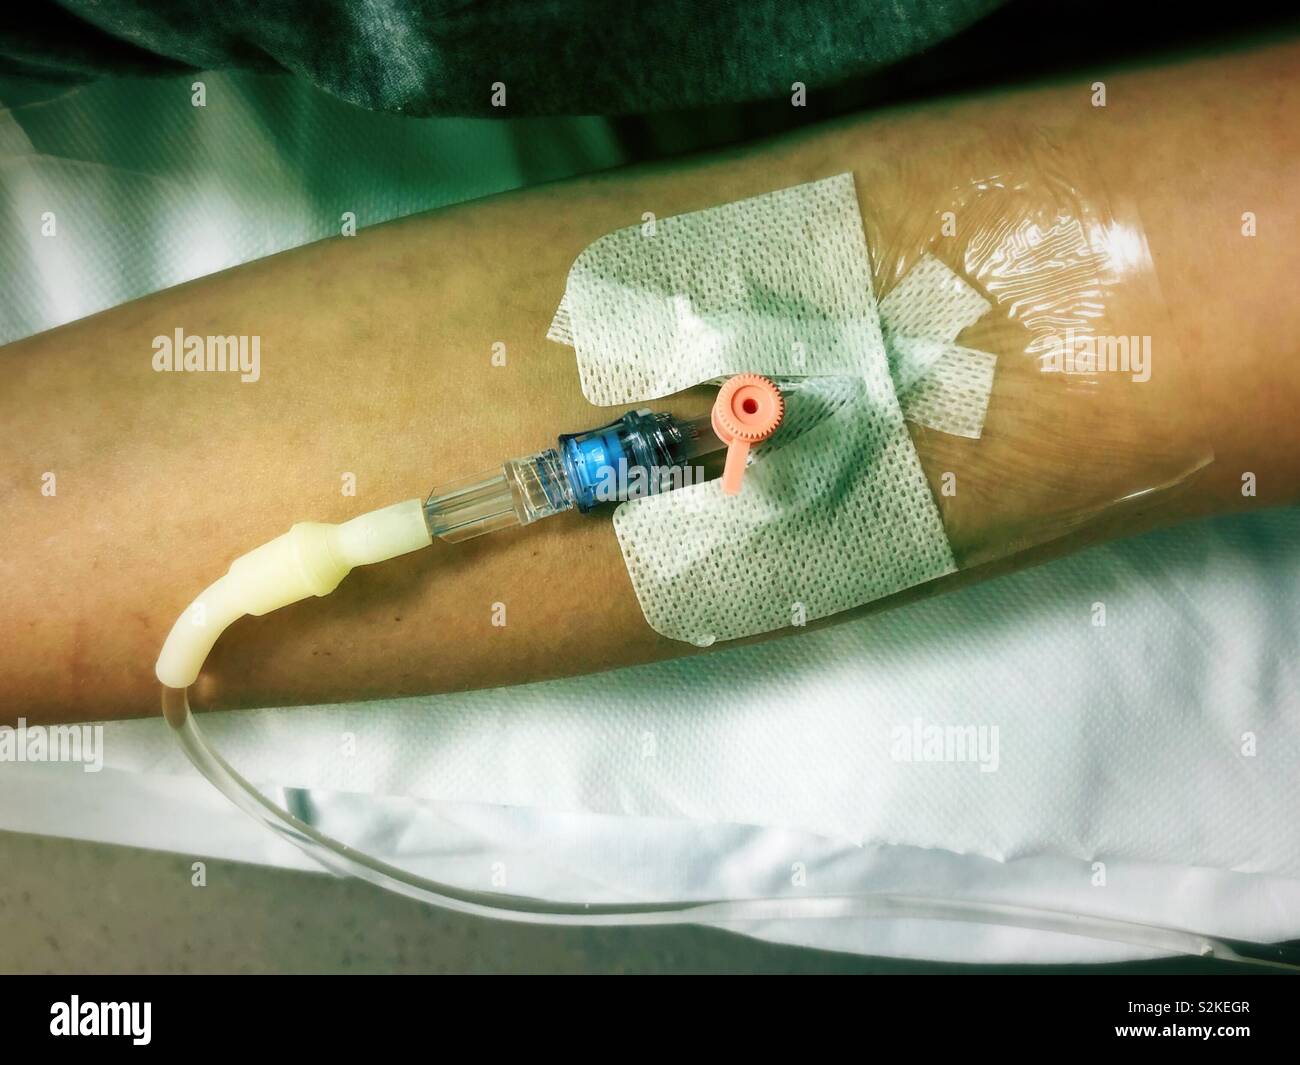 A patient's arm with an intravenous drip Stock Photo